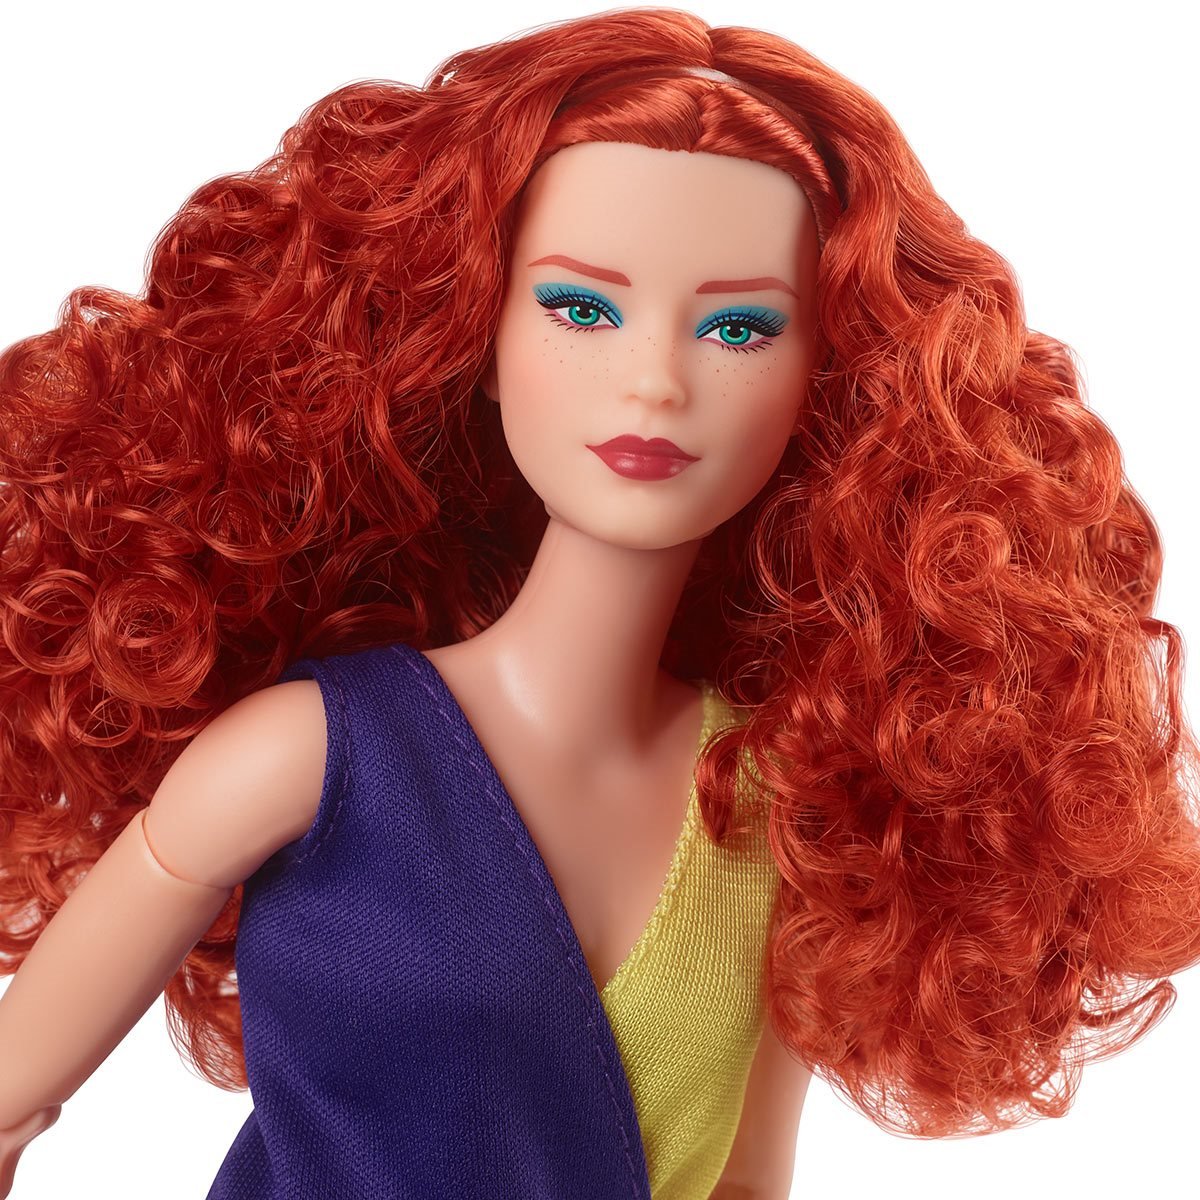 klep Maria Maan Barbie Looks Doll #13 with Red Hair - Entertainment Earth